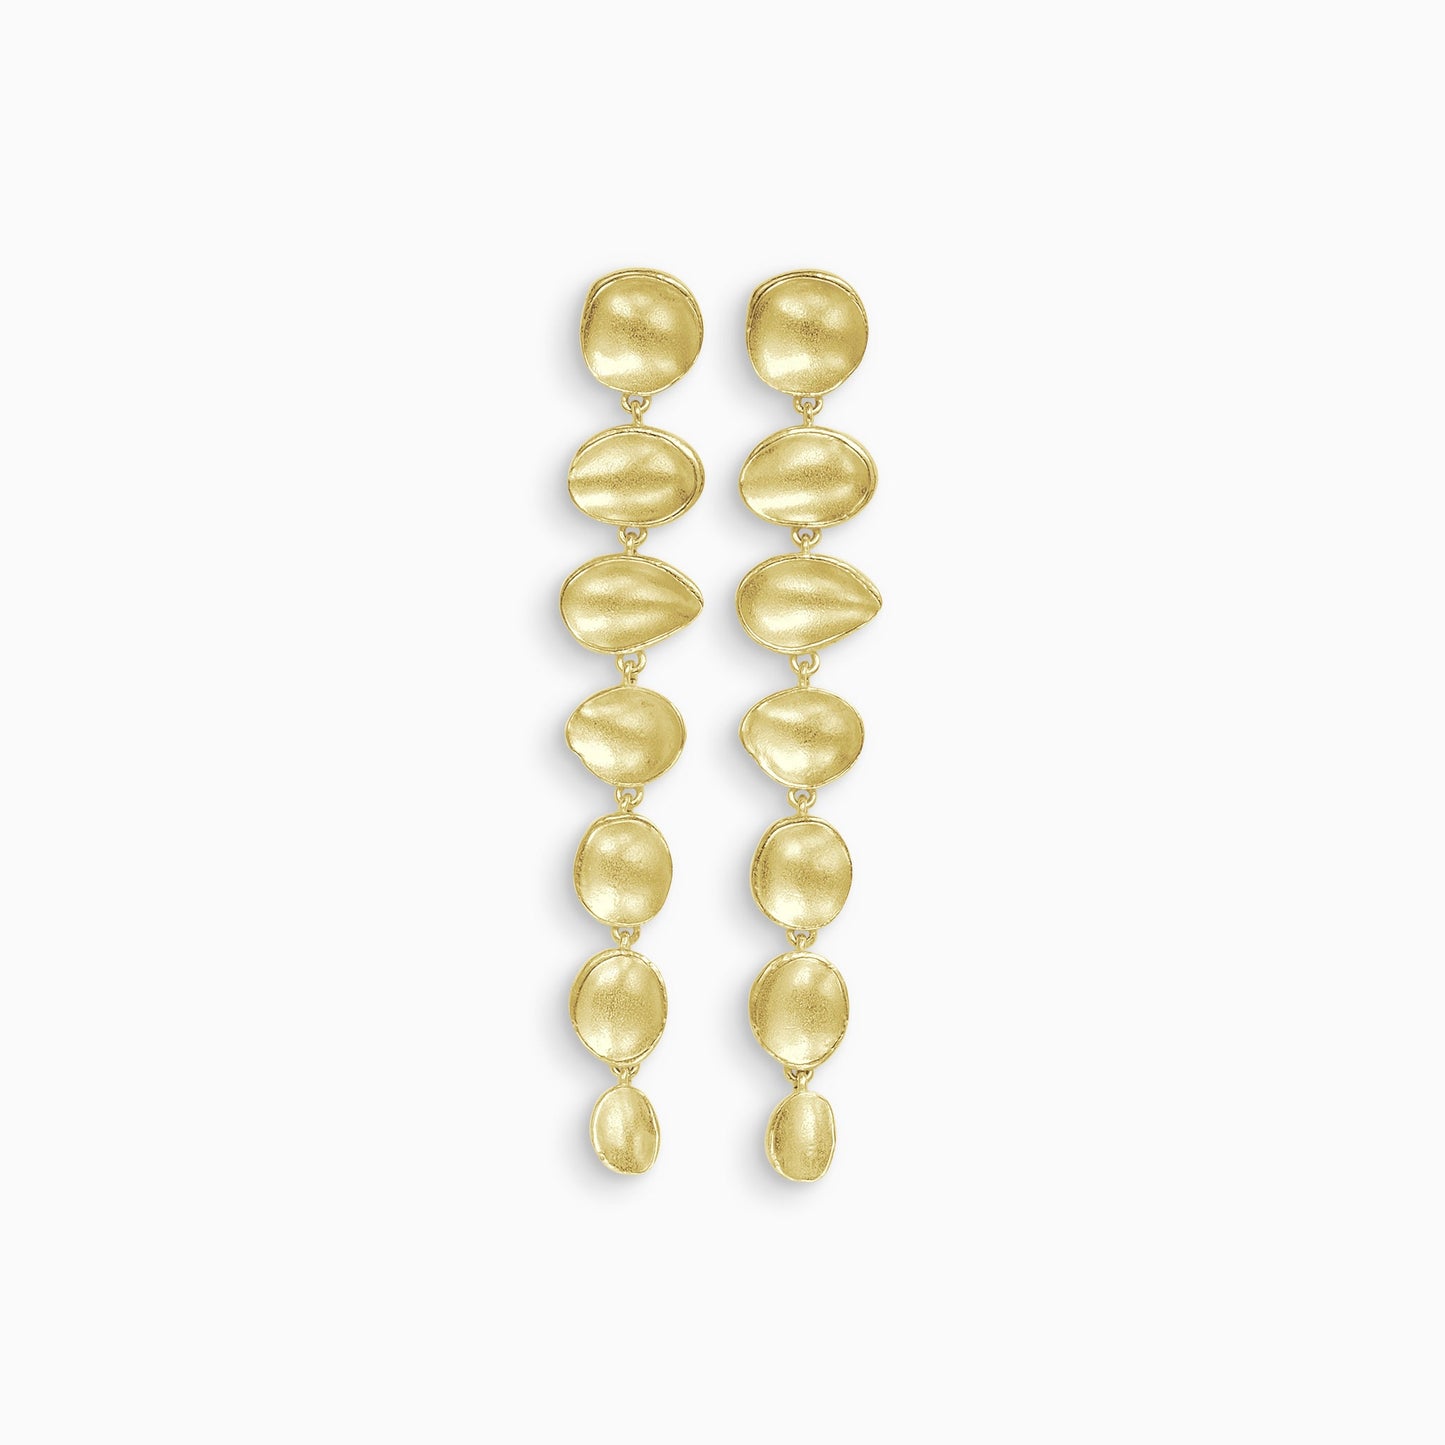 A pair of 18ct Fairtrade yellow gold drop earrings. A line of 7 articulating concave discs of various organic shapes and sizes with a stud ear fastening on the top disc. Satin finish. 70mm length, 10mm width.